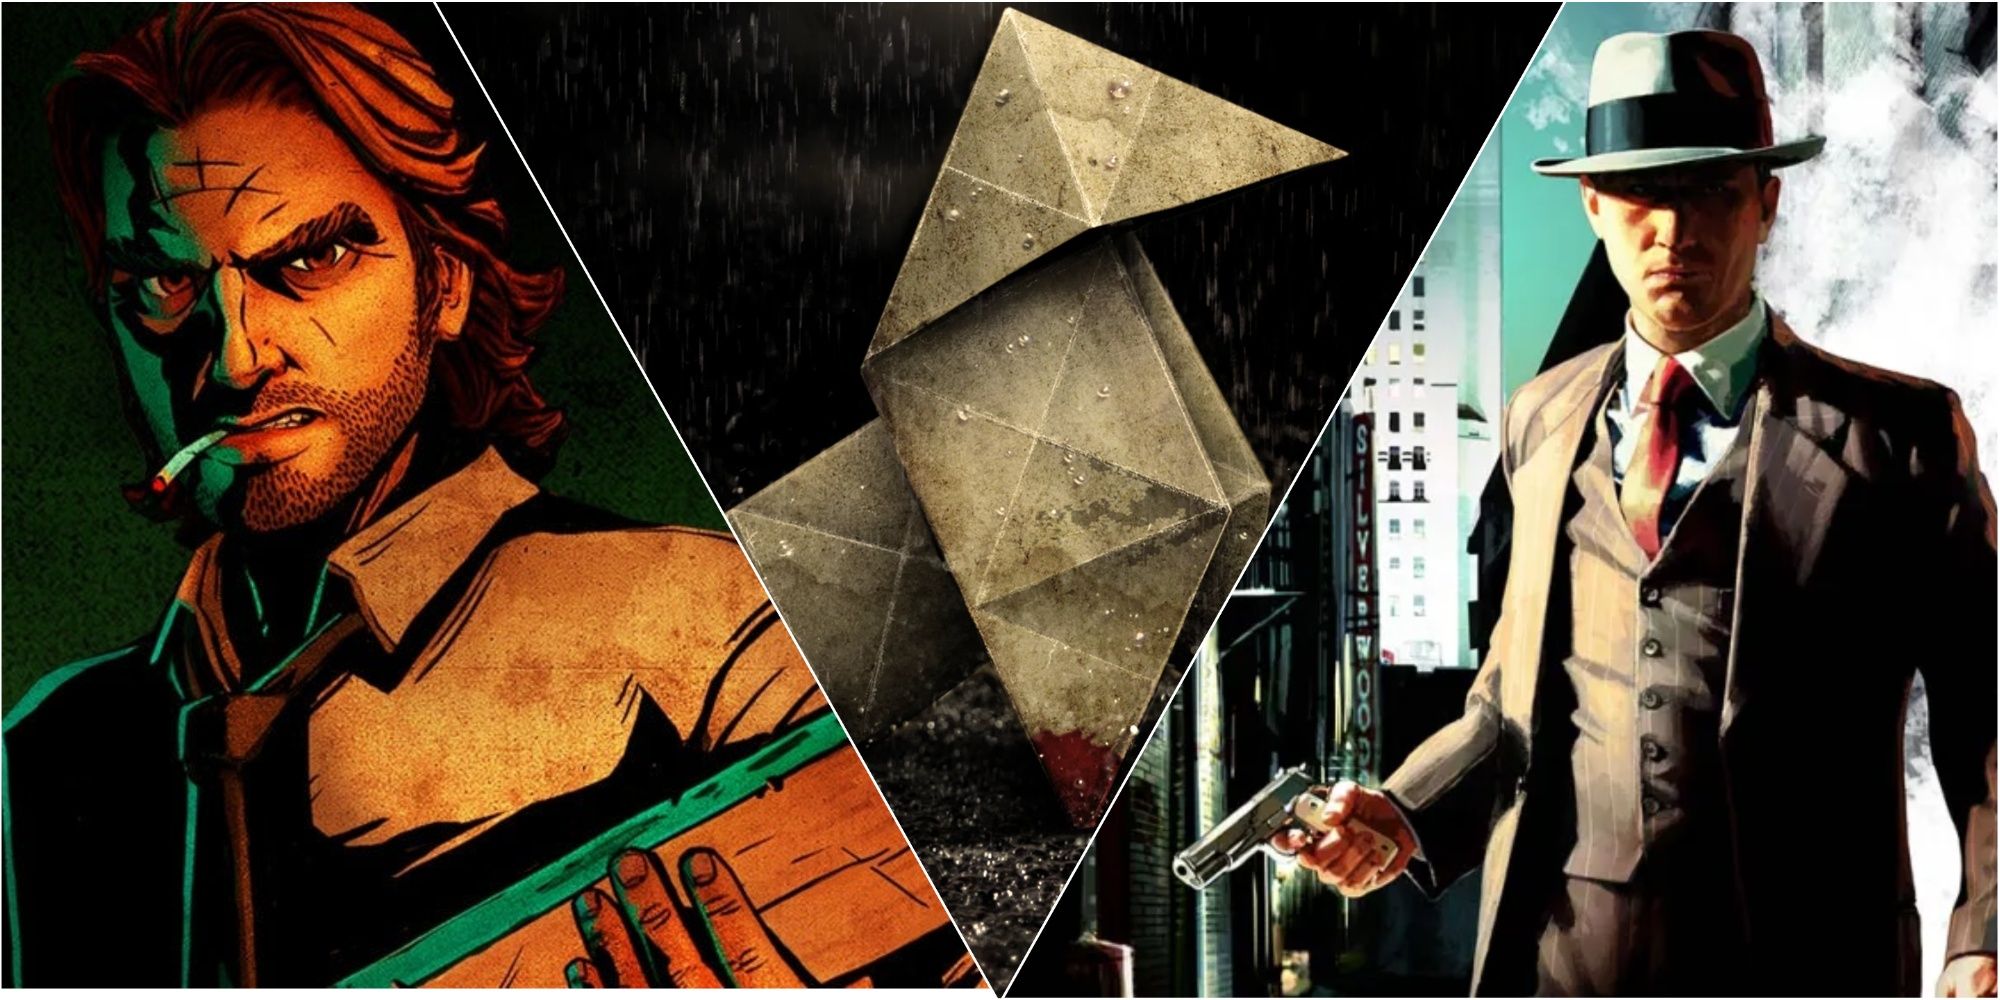 Posters for The Wolf Among Us, Heavy Rain and LA Noire